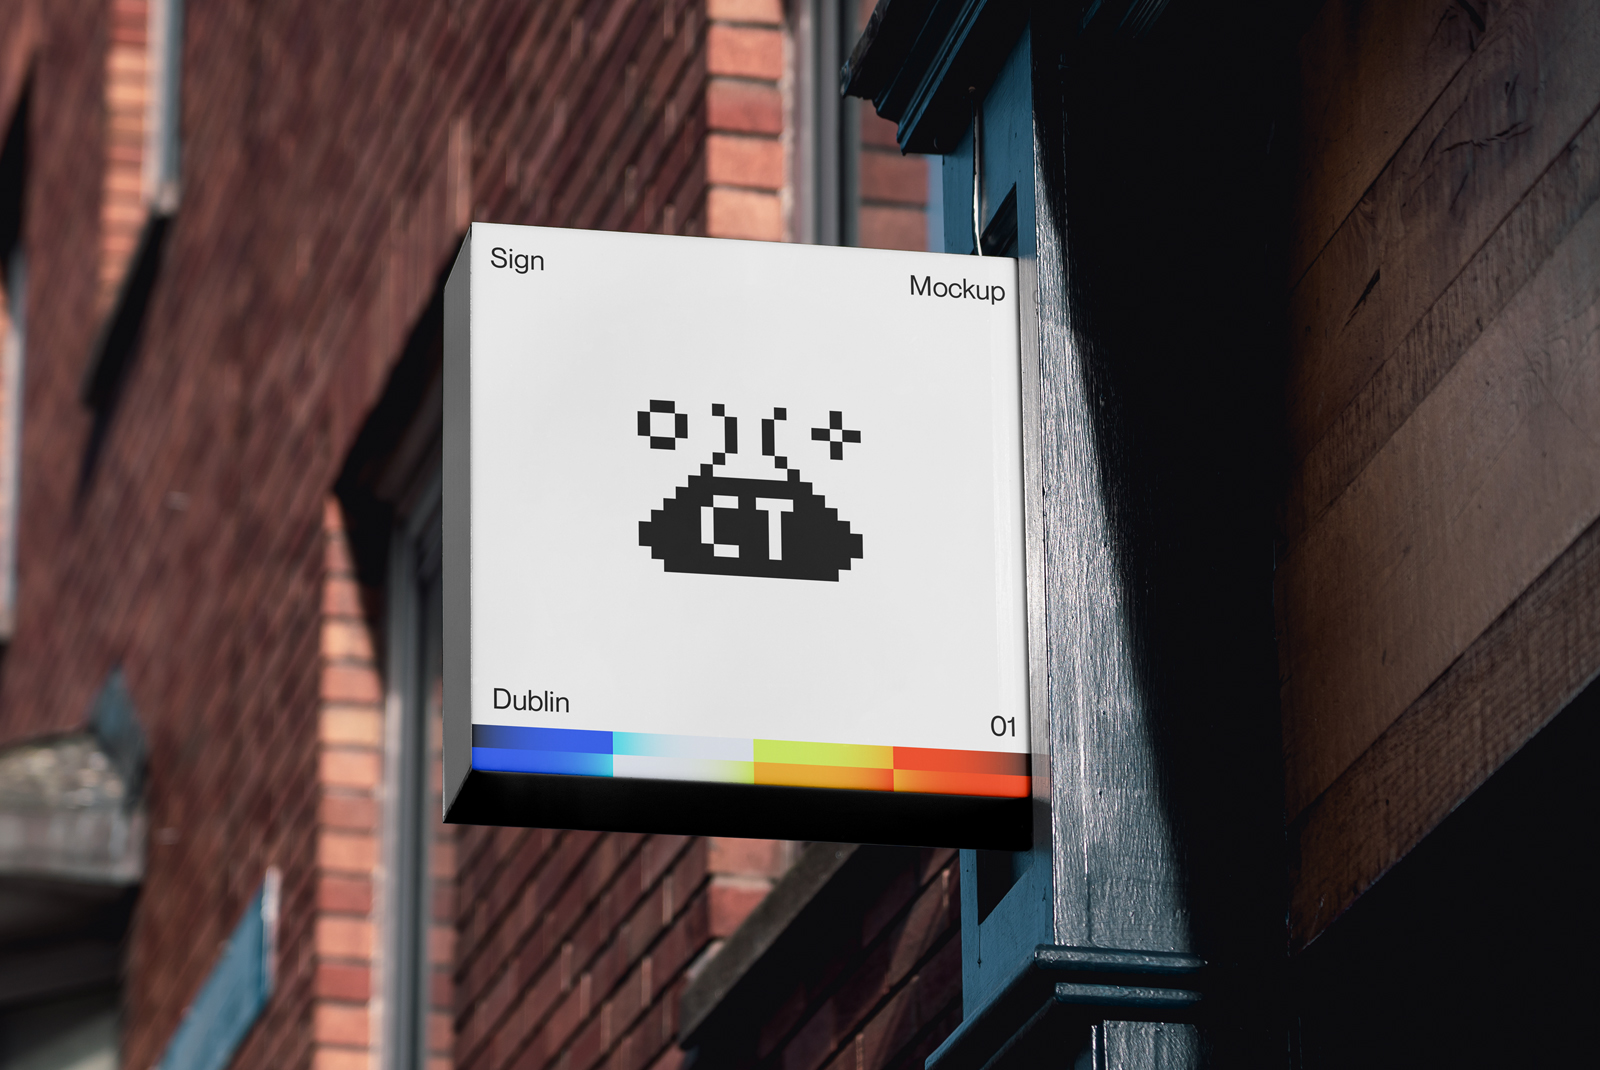 Urban signboard mockup hanging on a building wall with a pixel art design display in an outdoor setting, ideal for showcasing branding designs.